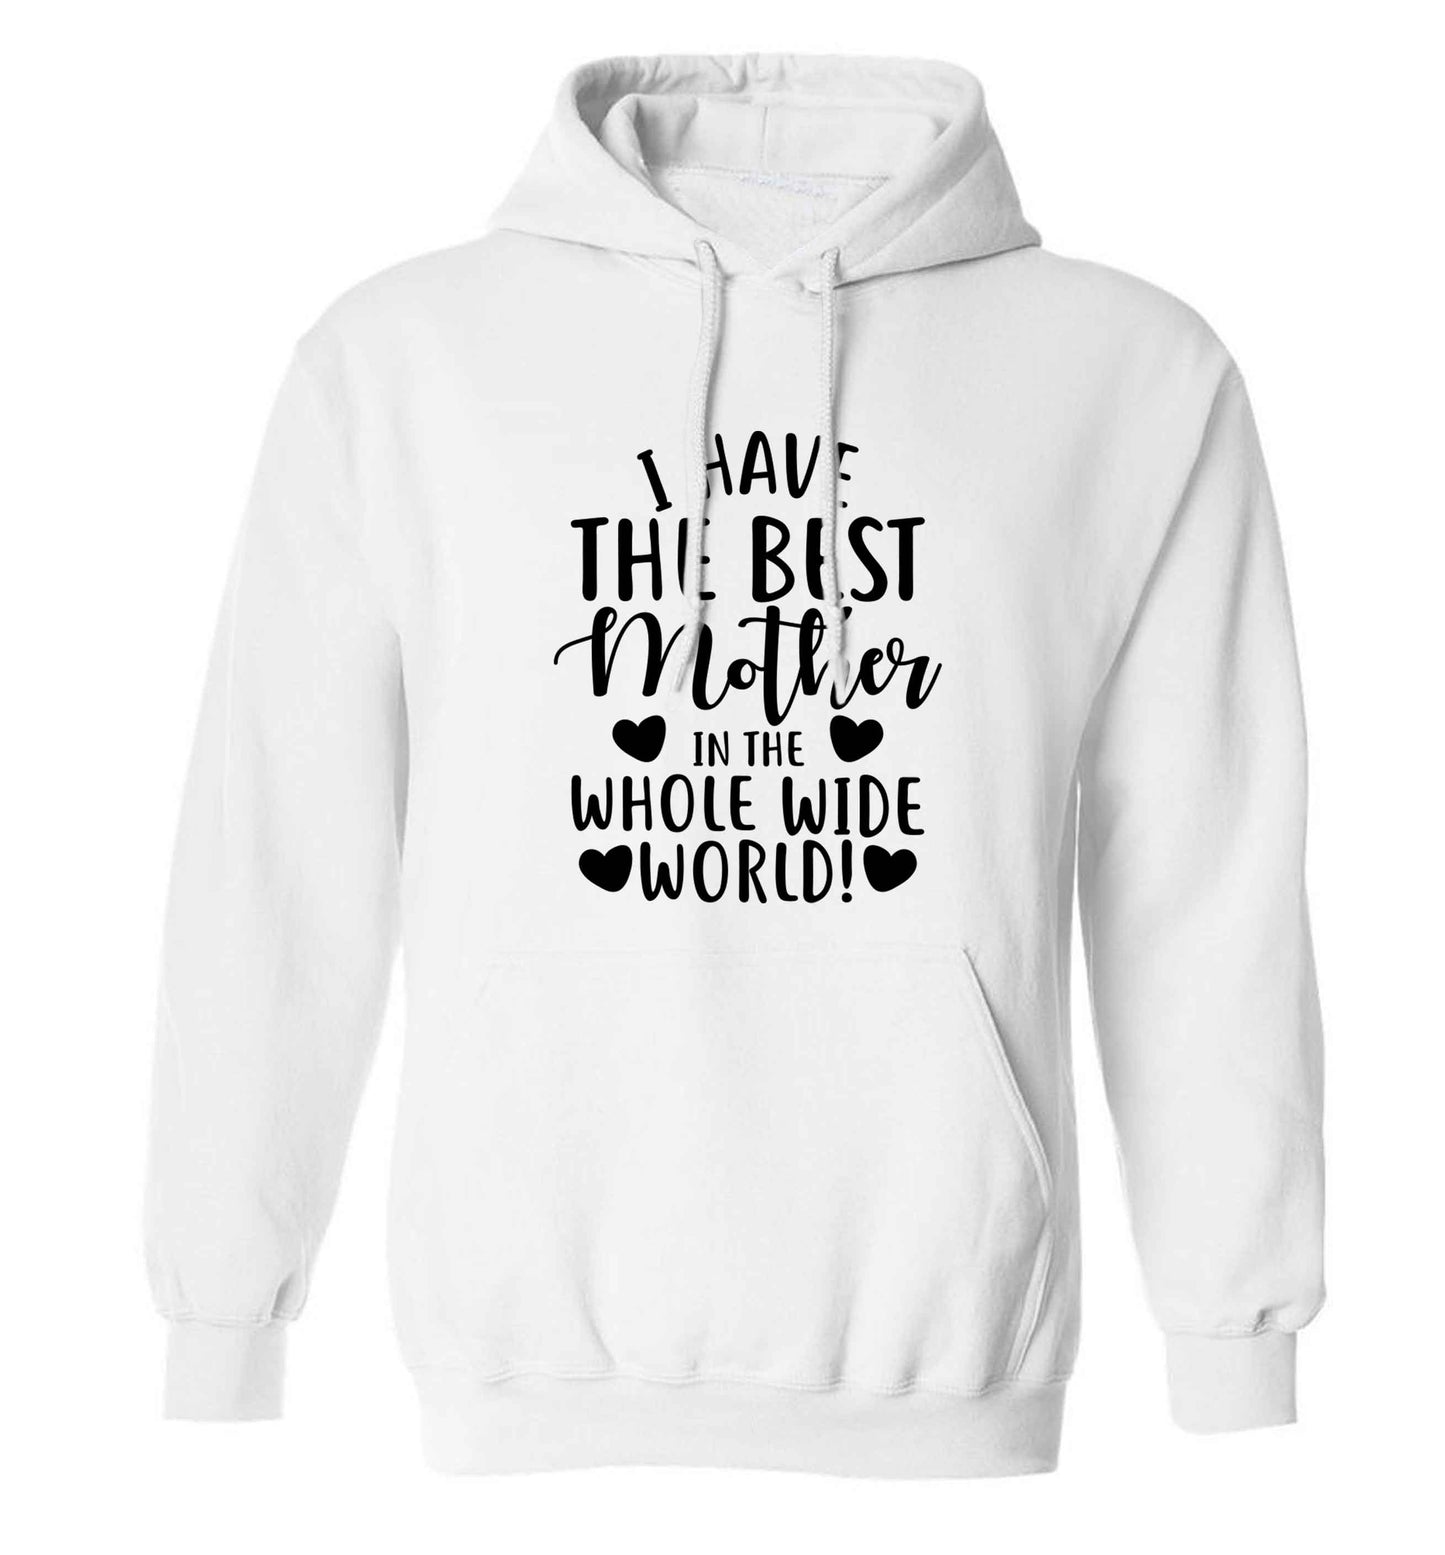 I have the best mother in the whole wide world adults unisex white hoodie 2XL